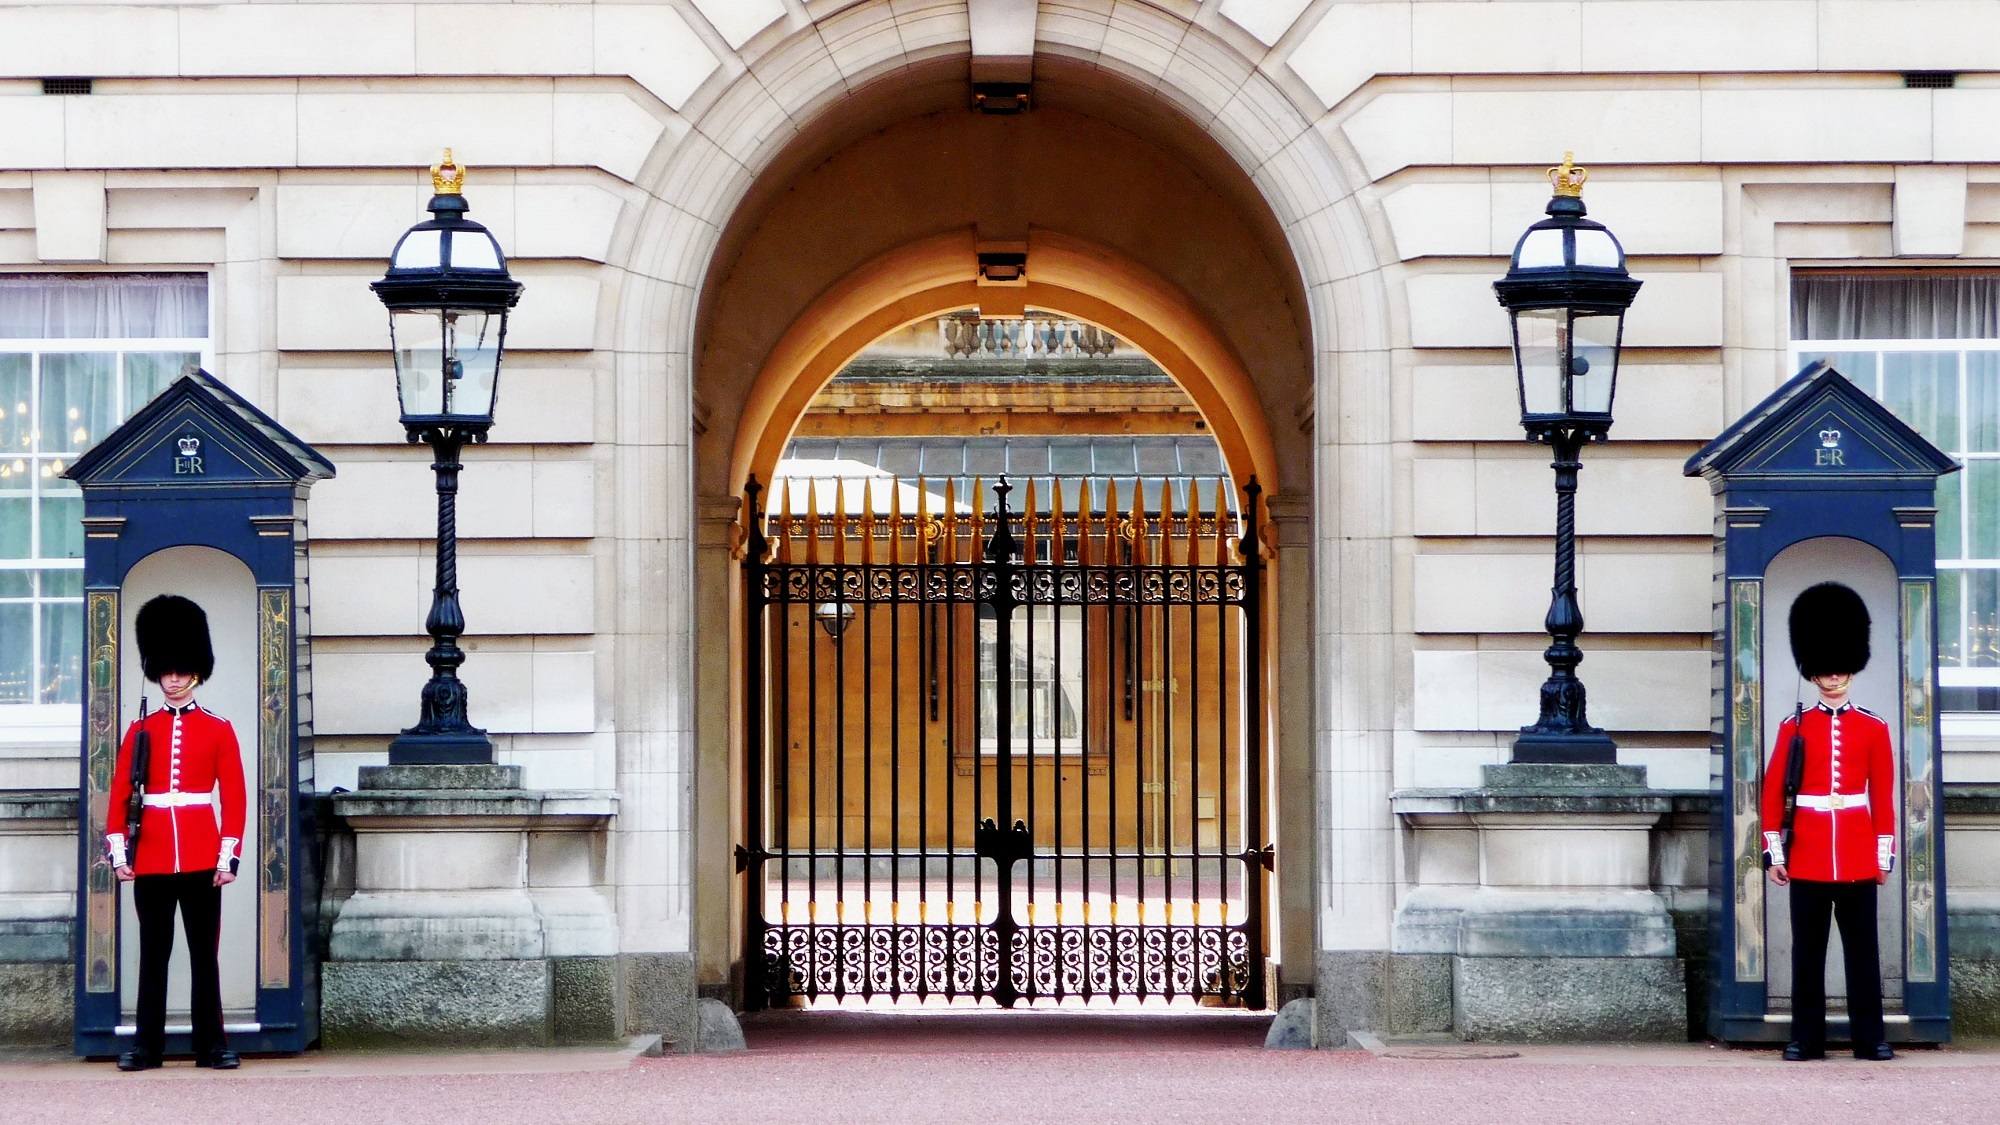 Buckingham Palace Building Gate Guard Lamp Post London Palace Of Westminster 2000x1125